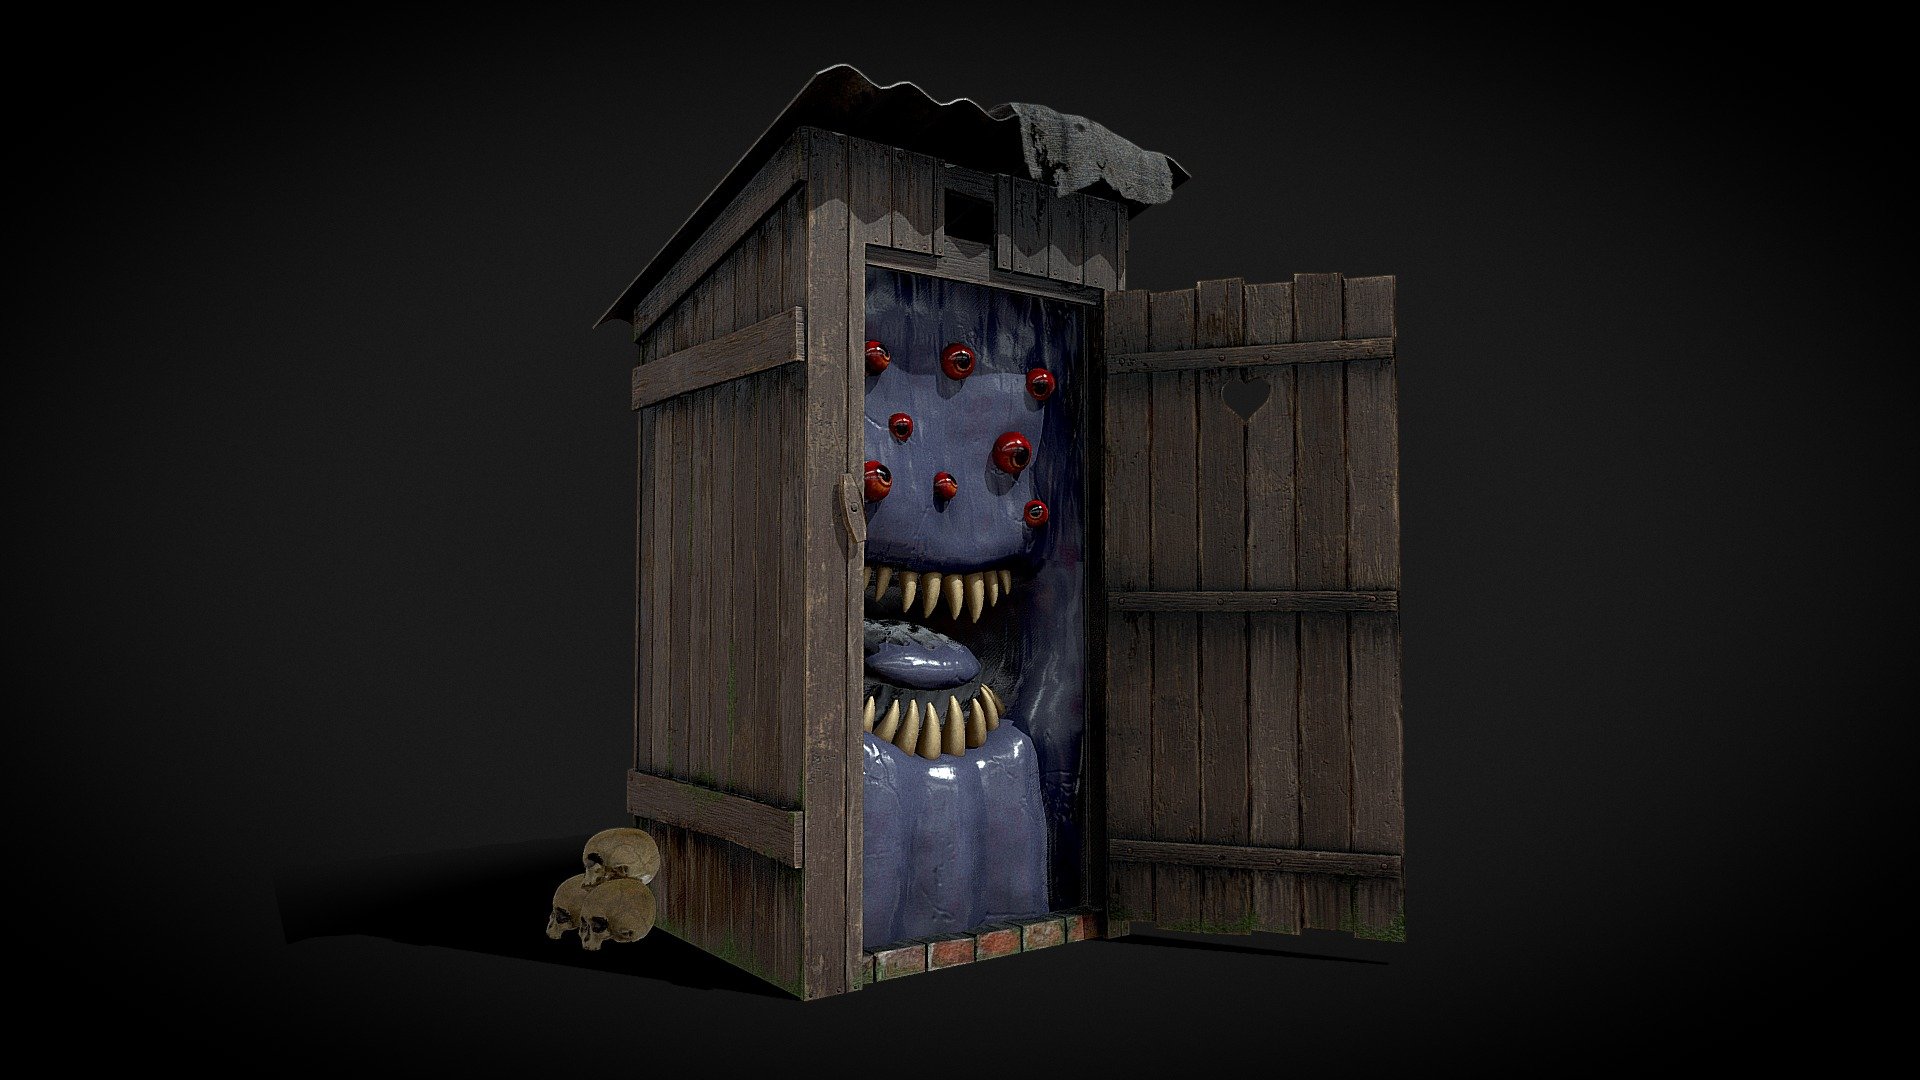 ArtStation - The Mimic - Five Nights at Freddy's